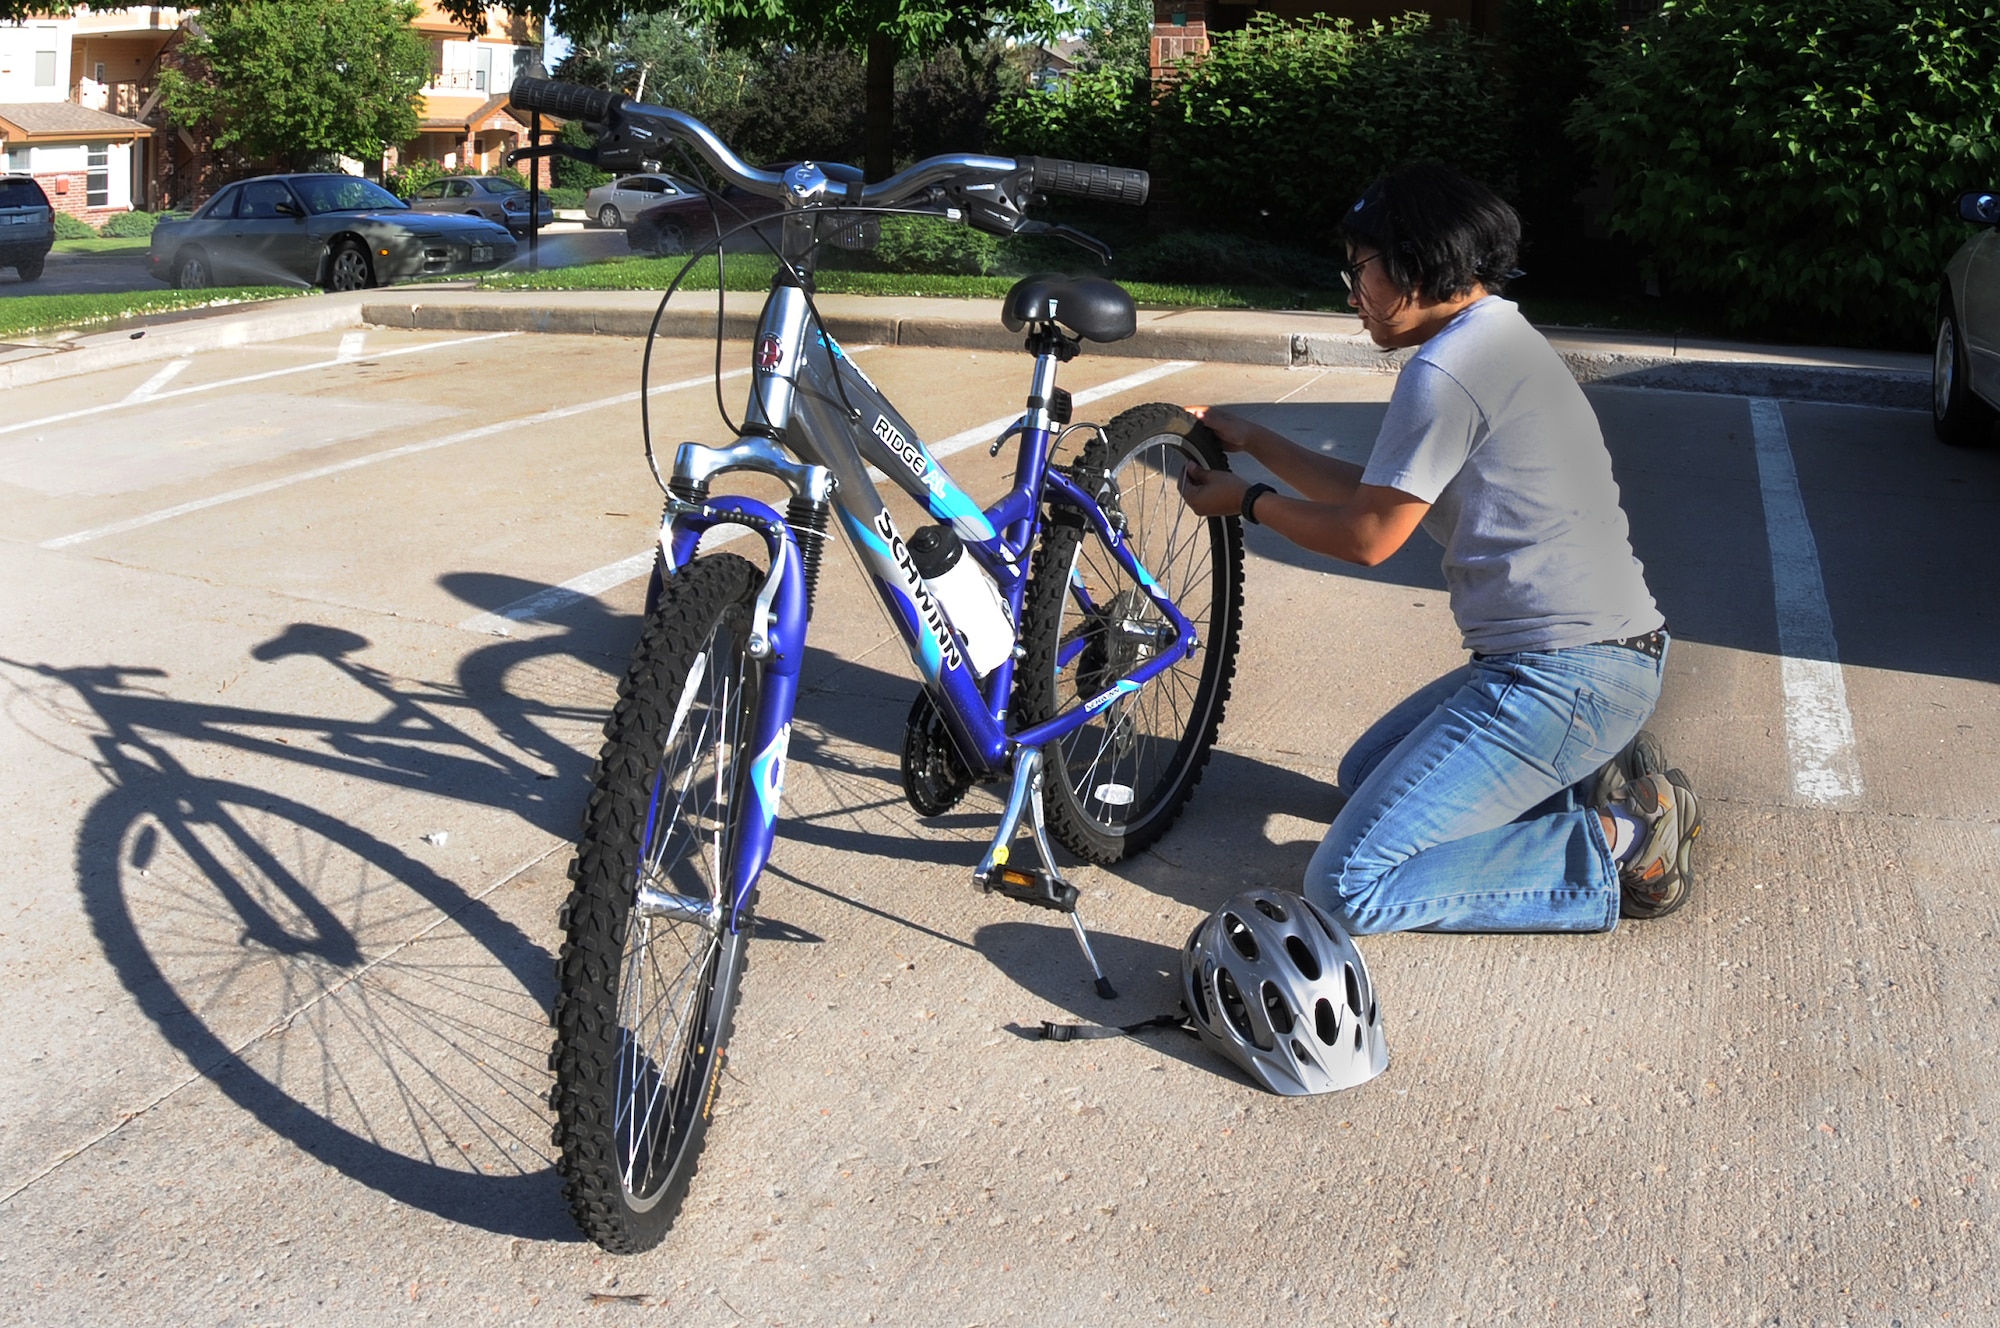 DENVER, Colo.-- Staff Sgt. Kathrine McDowell practices good safety procedures by checking her tires before riding her bicycle June 22. Sergeant McDowell keeps herself protected and uses all the right safety tips. (U.S. Air Force Photo by Airman 1st Class Manisha Vasquez)